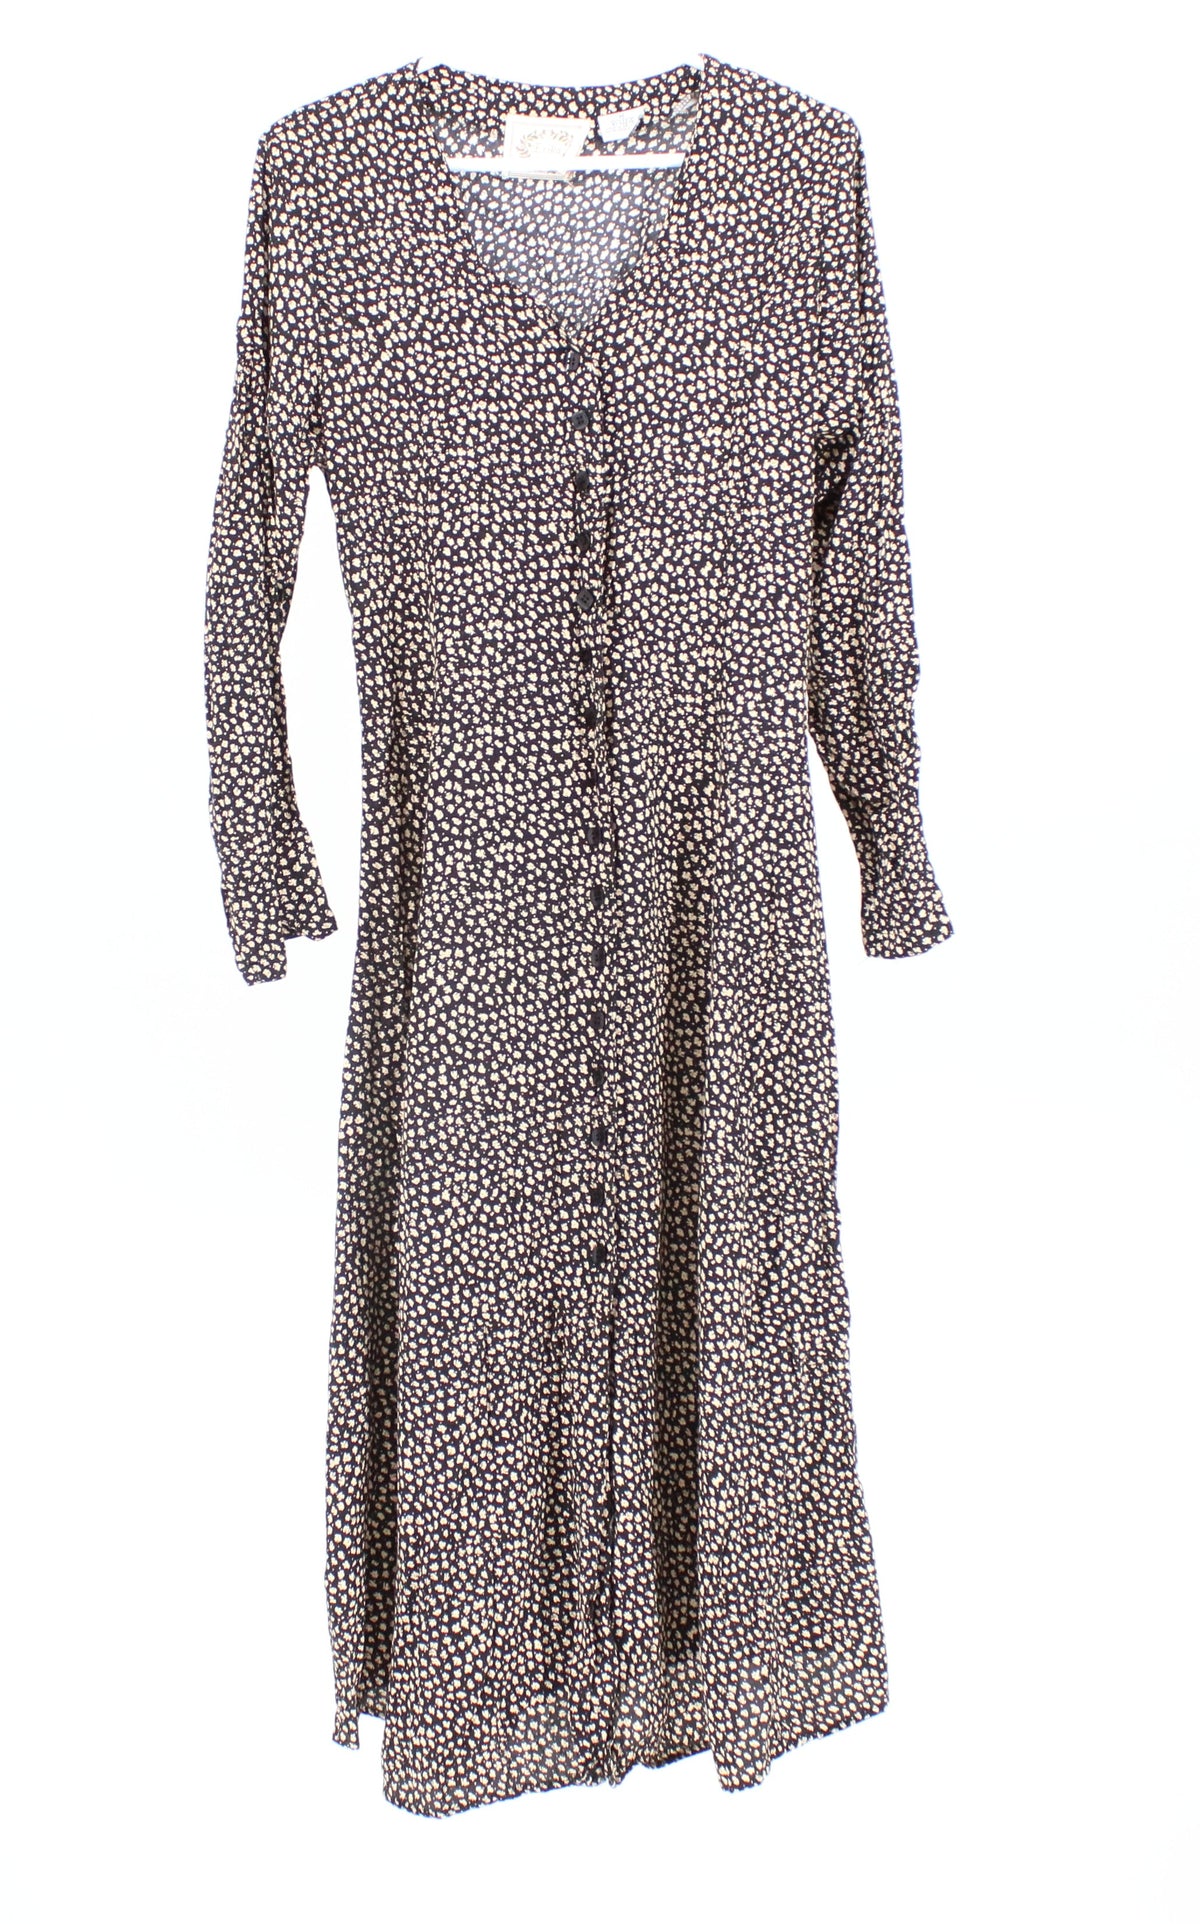 Erika Black Printed Long Sleeves Dress With Front Buttons Closure